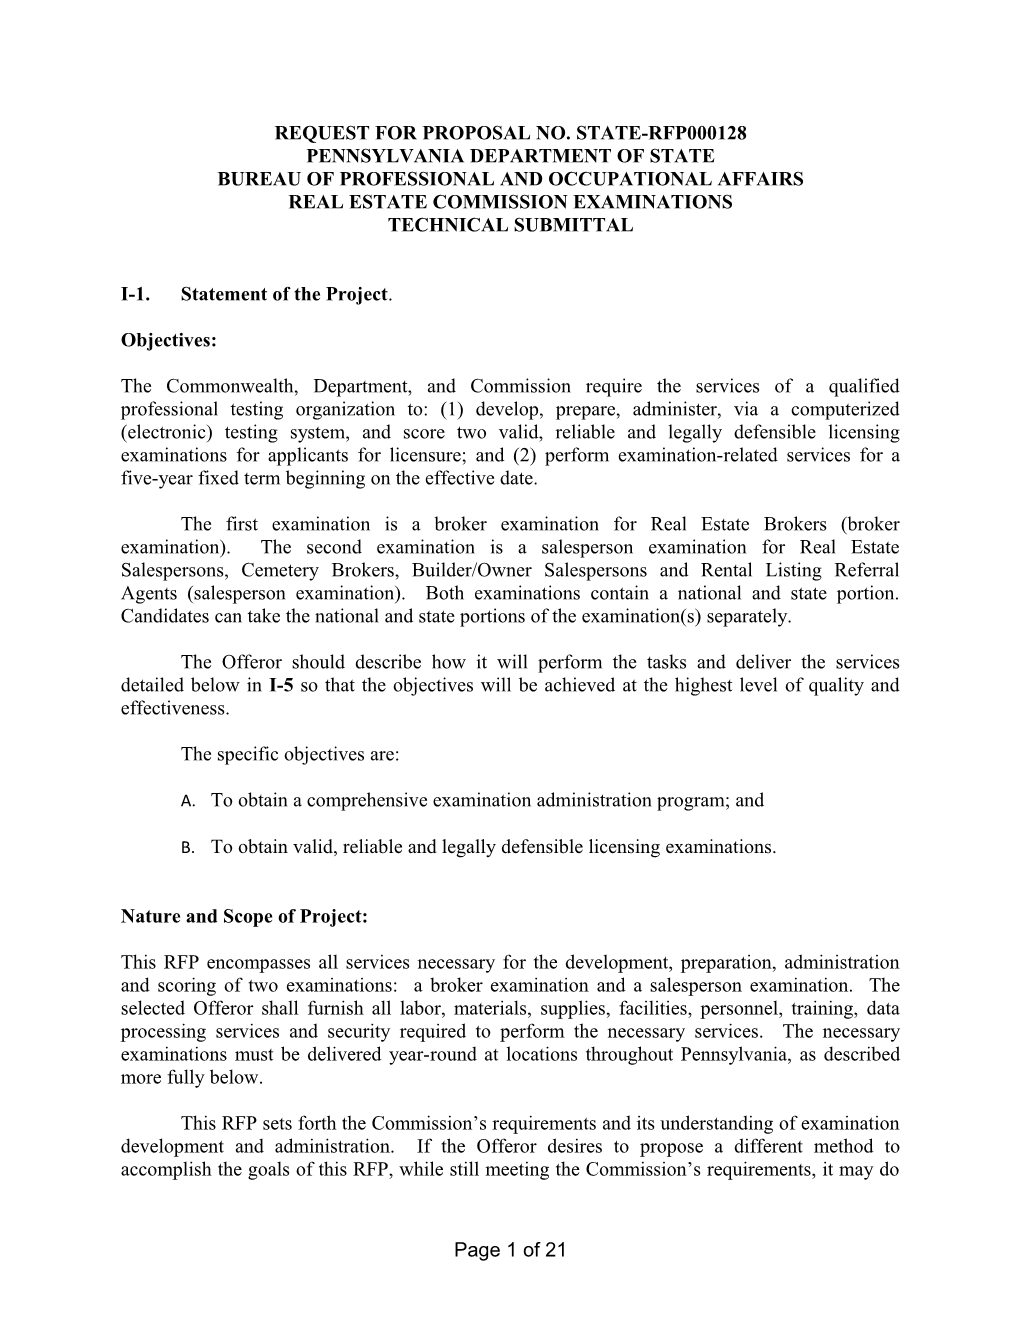 Request for Proposal No.State-Rfp000128